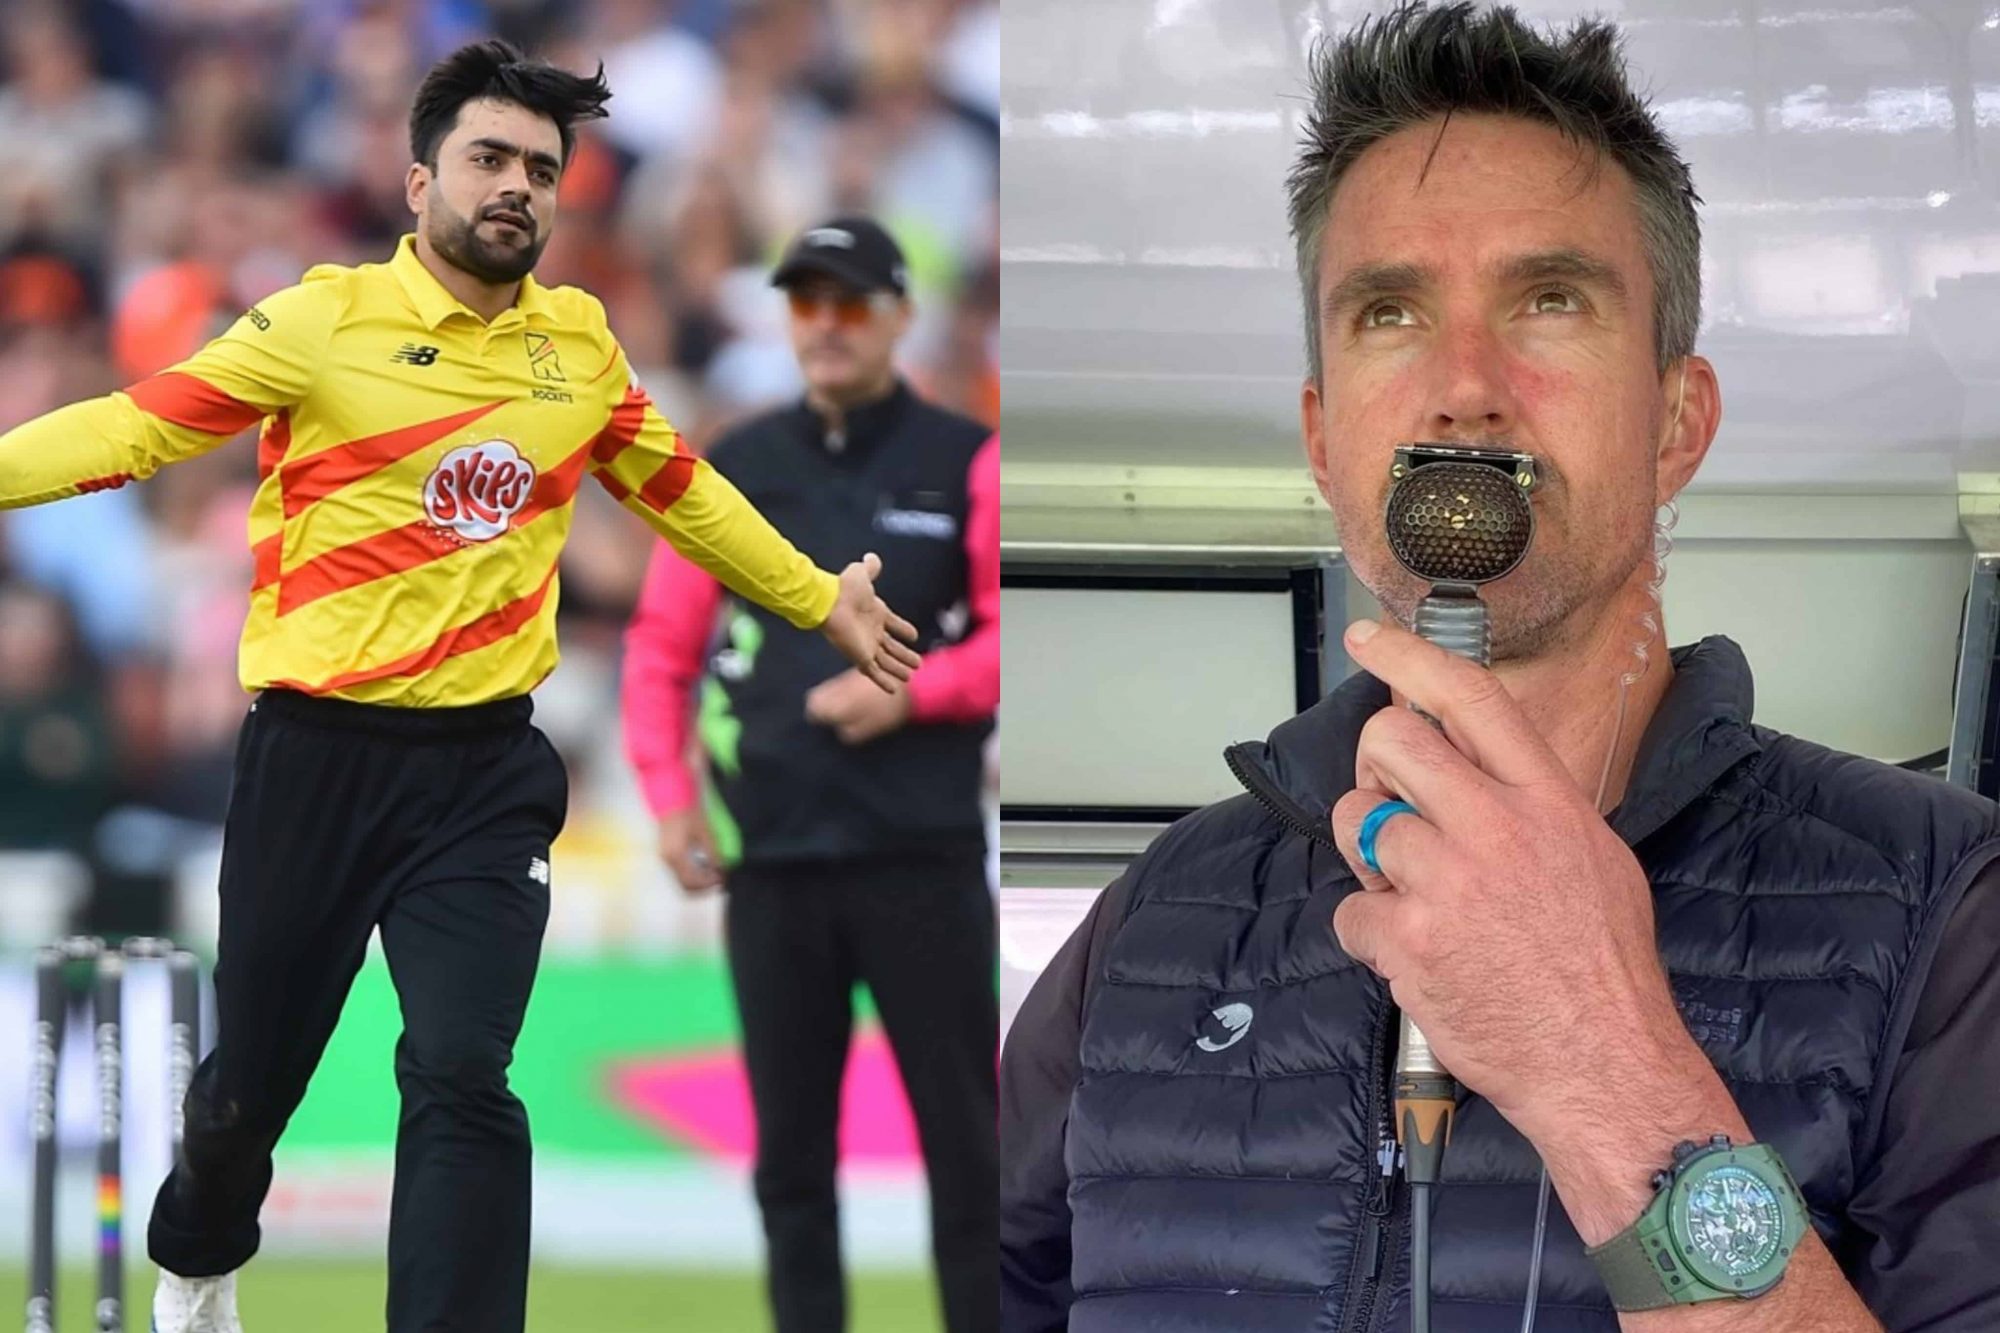 "He Is Worried, He Can't Get His Family Out Of Afghanistan" - Kevin Pietersen Reveals The Mental Pressure On Rashid Khan